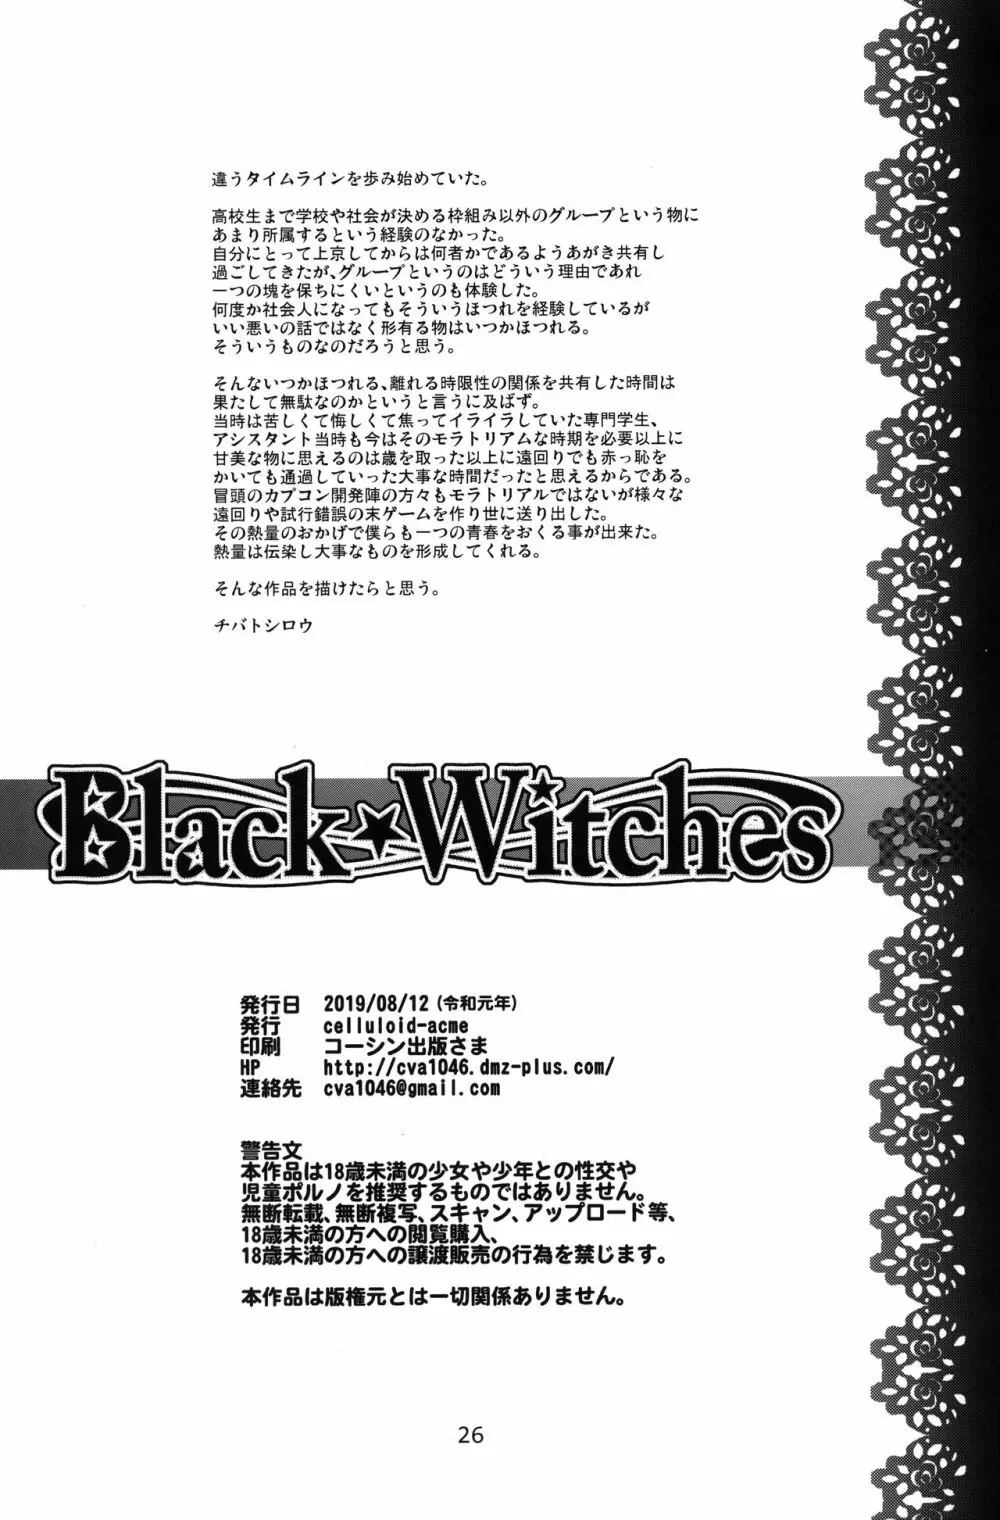 Black Witches 2 Page.26